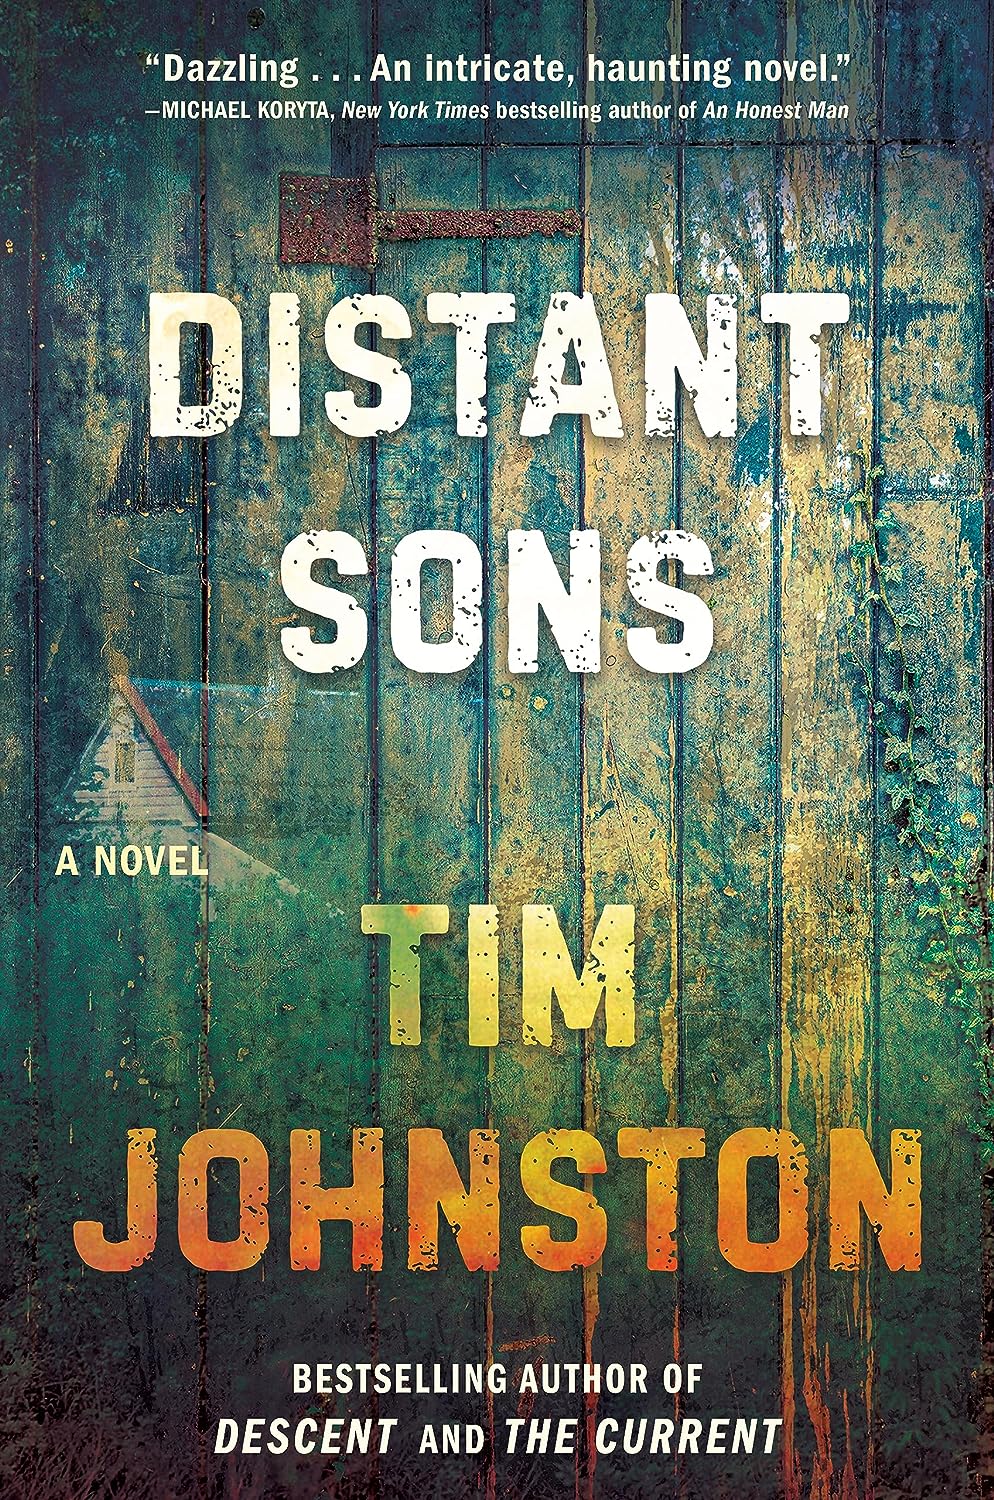 Image for "Distant Sons"